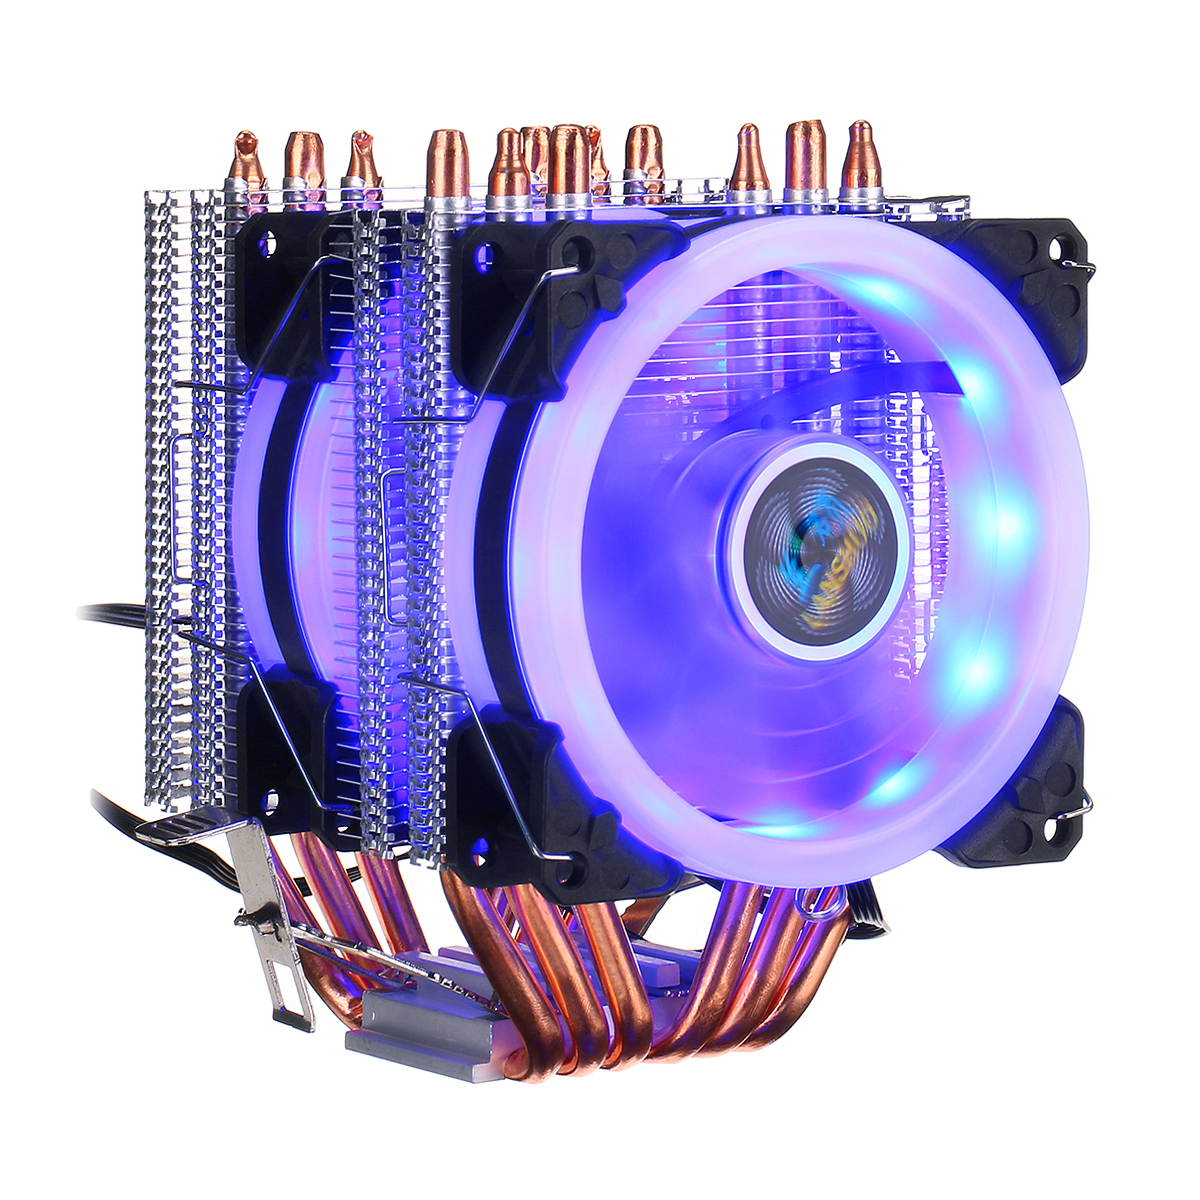 CPU-Cooler-LED-RGB-6-Heatpipes-4-Pin-Dual-Fan-For-Intel-115611551151775-AMD-1761052-3